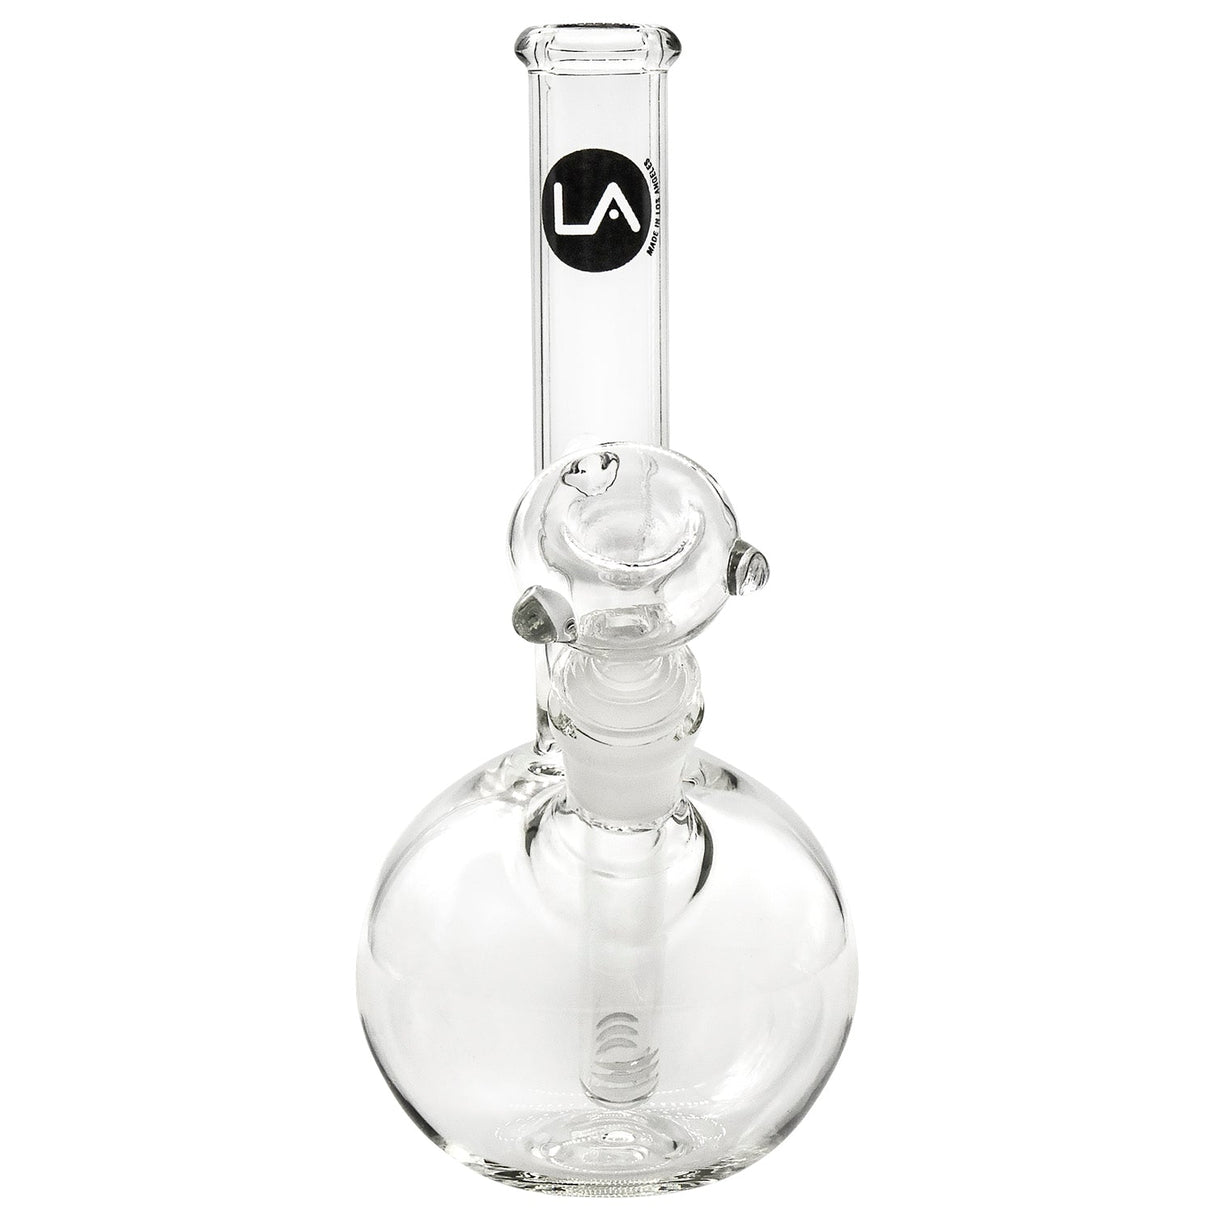 LA Pipes Simple Bubble Bong made of Borosilicate Glass, front view on white background